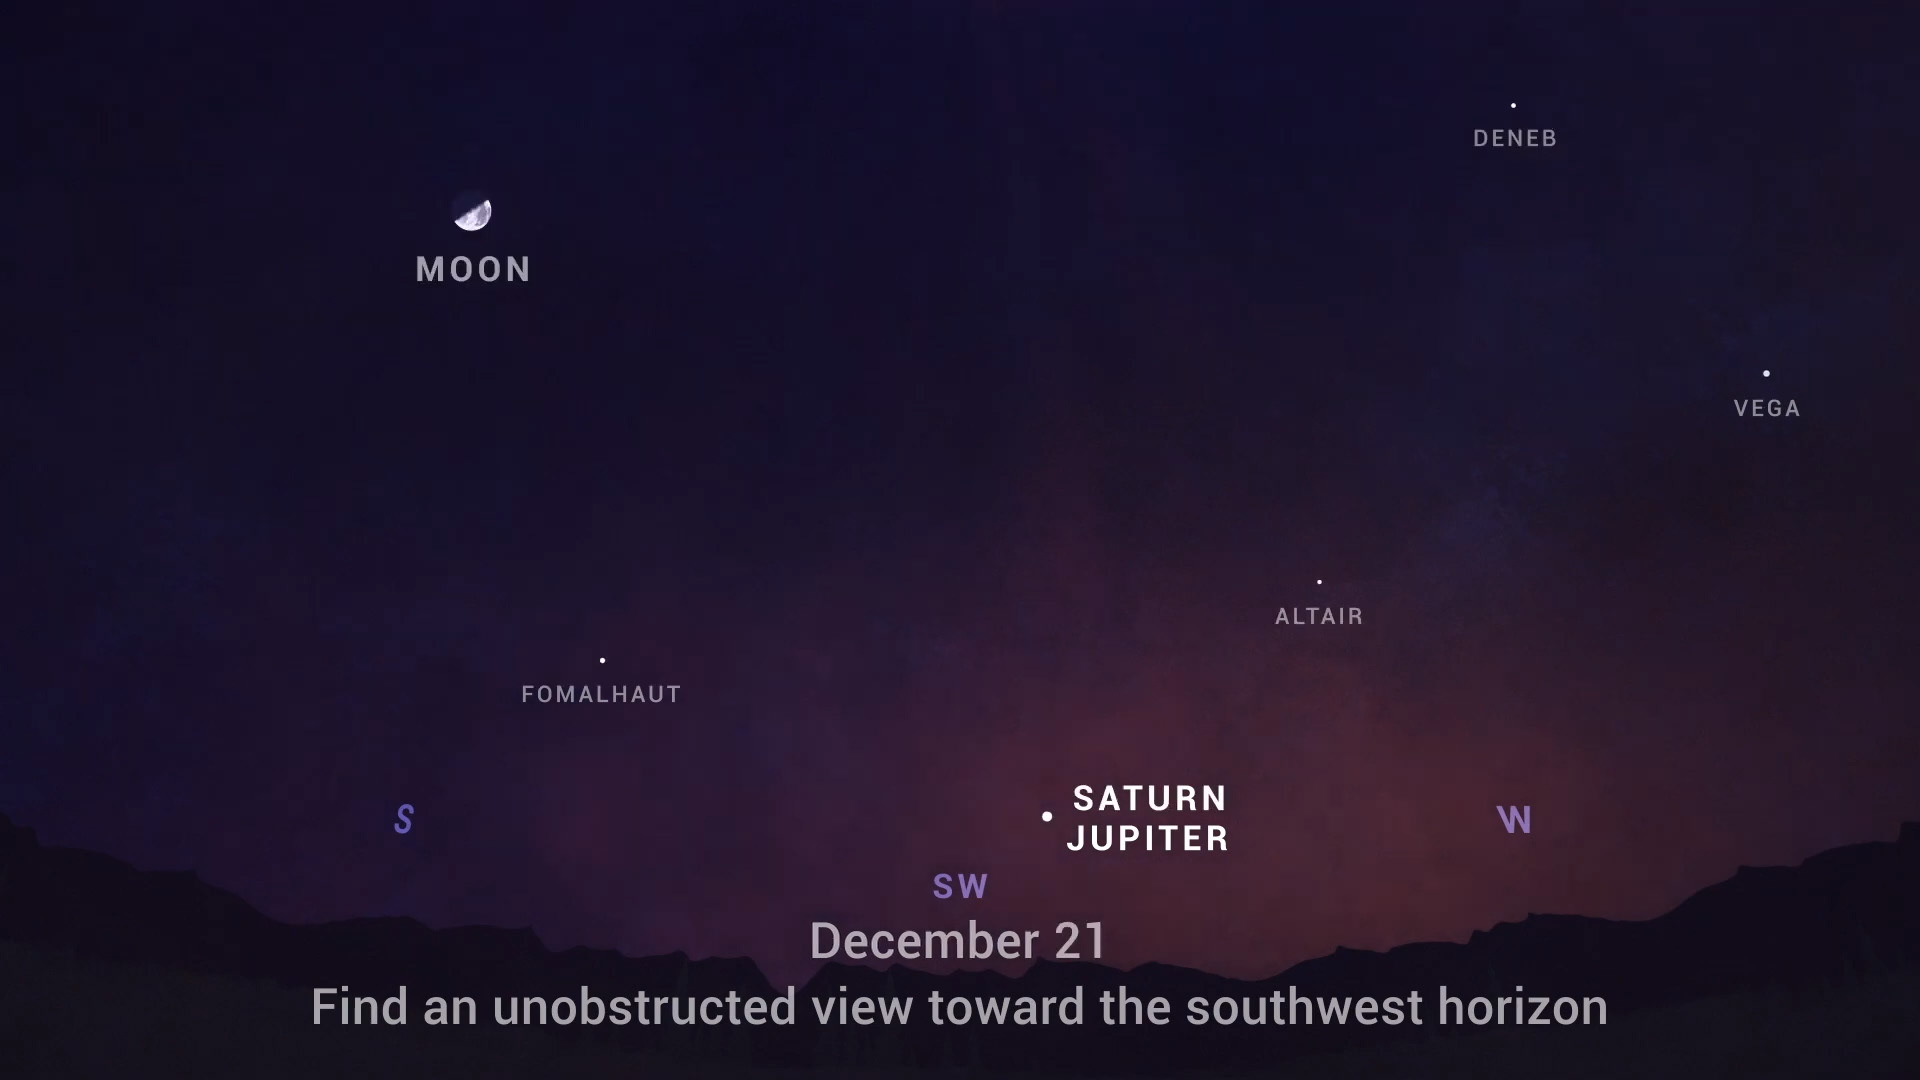 Sky chart showing Jupiter and Saturn to the southwest in the December 21 night sky.